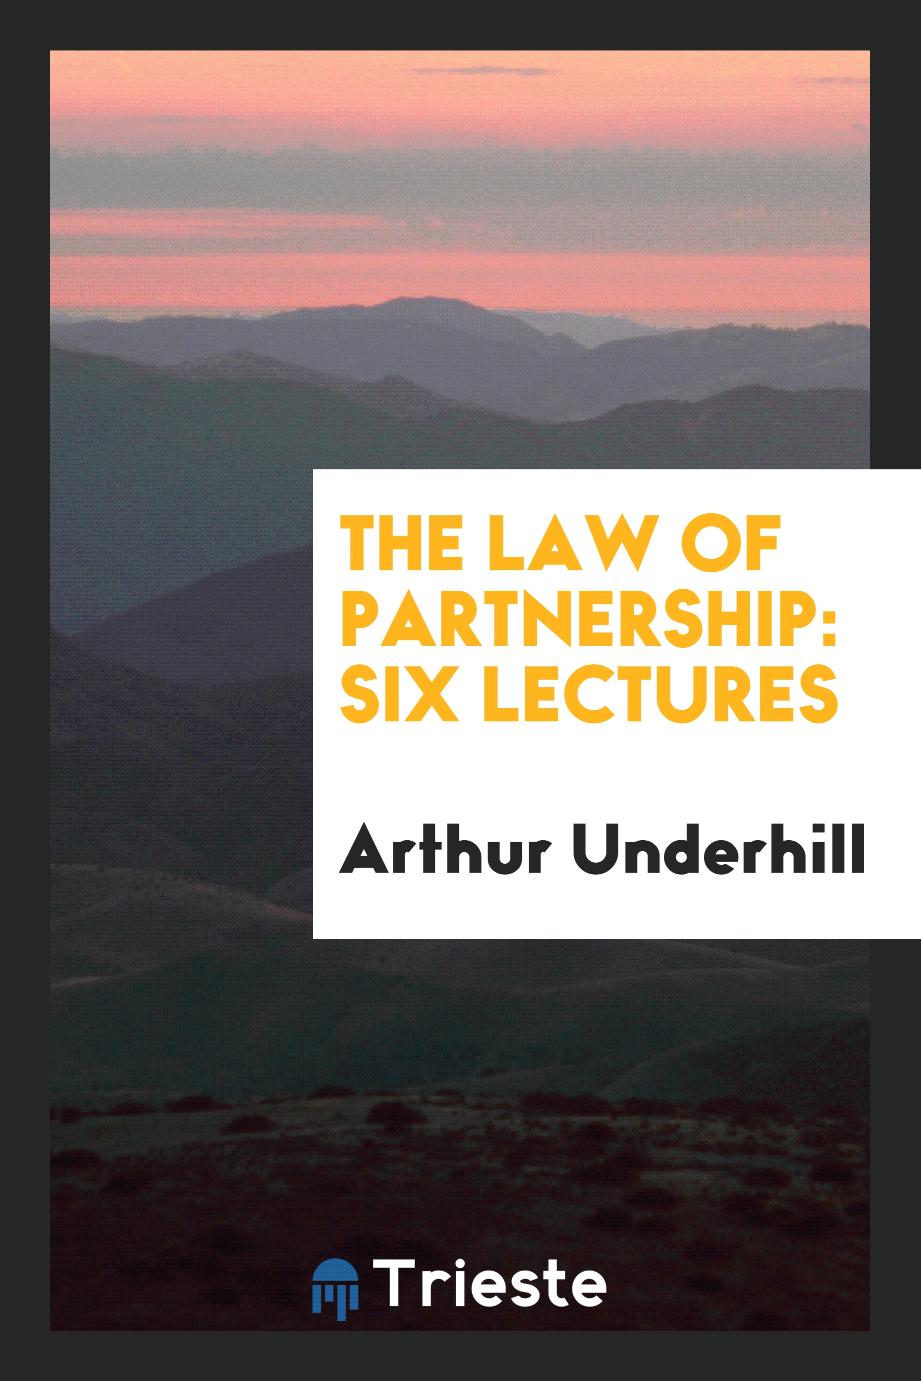 The law of partnership: Six lectures